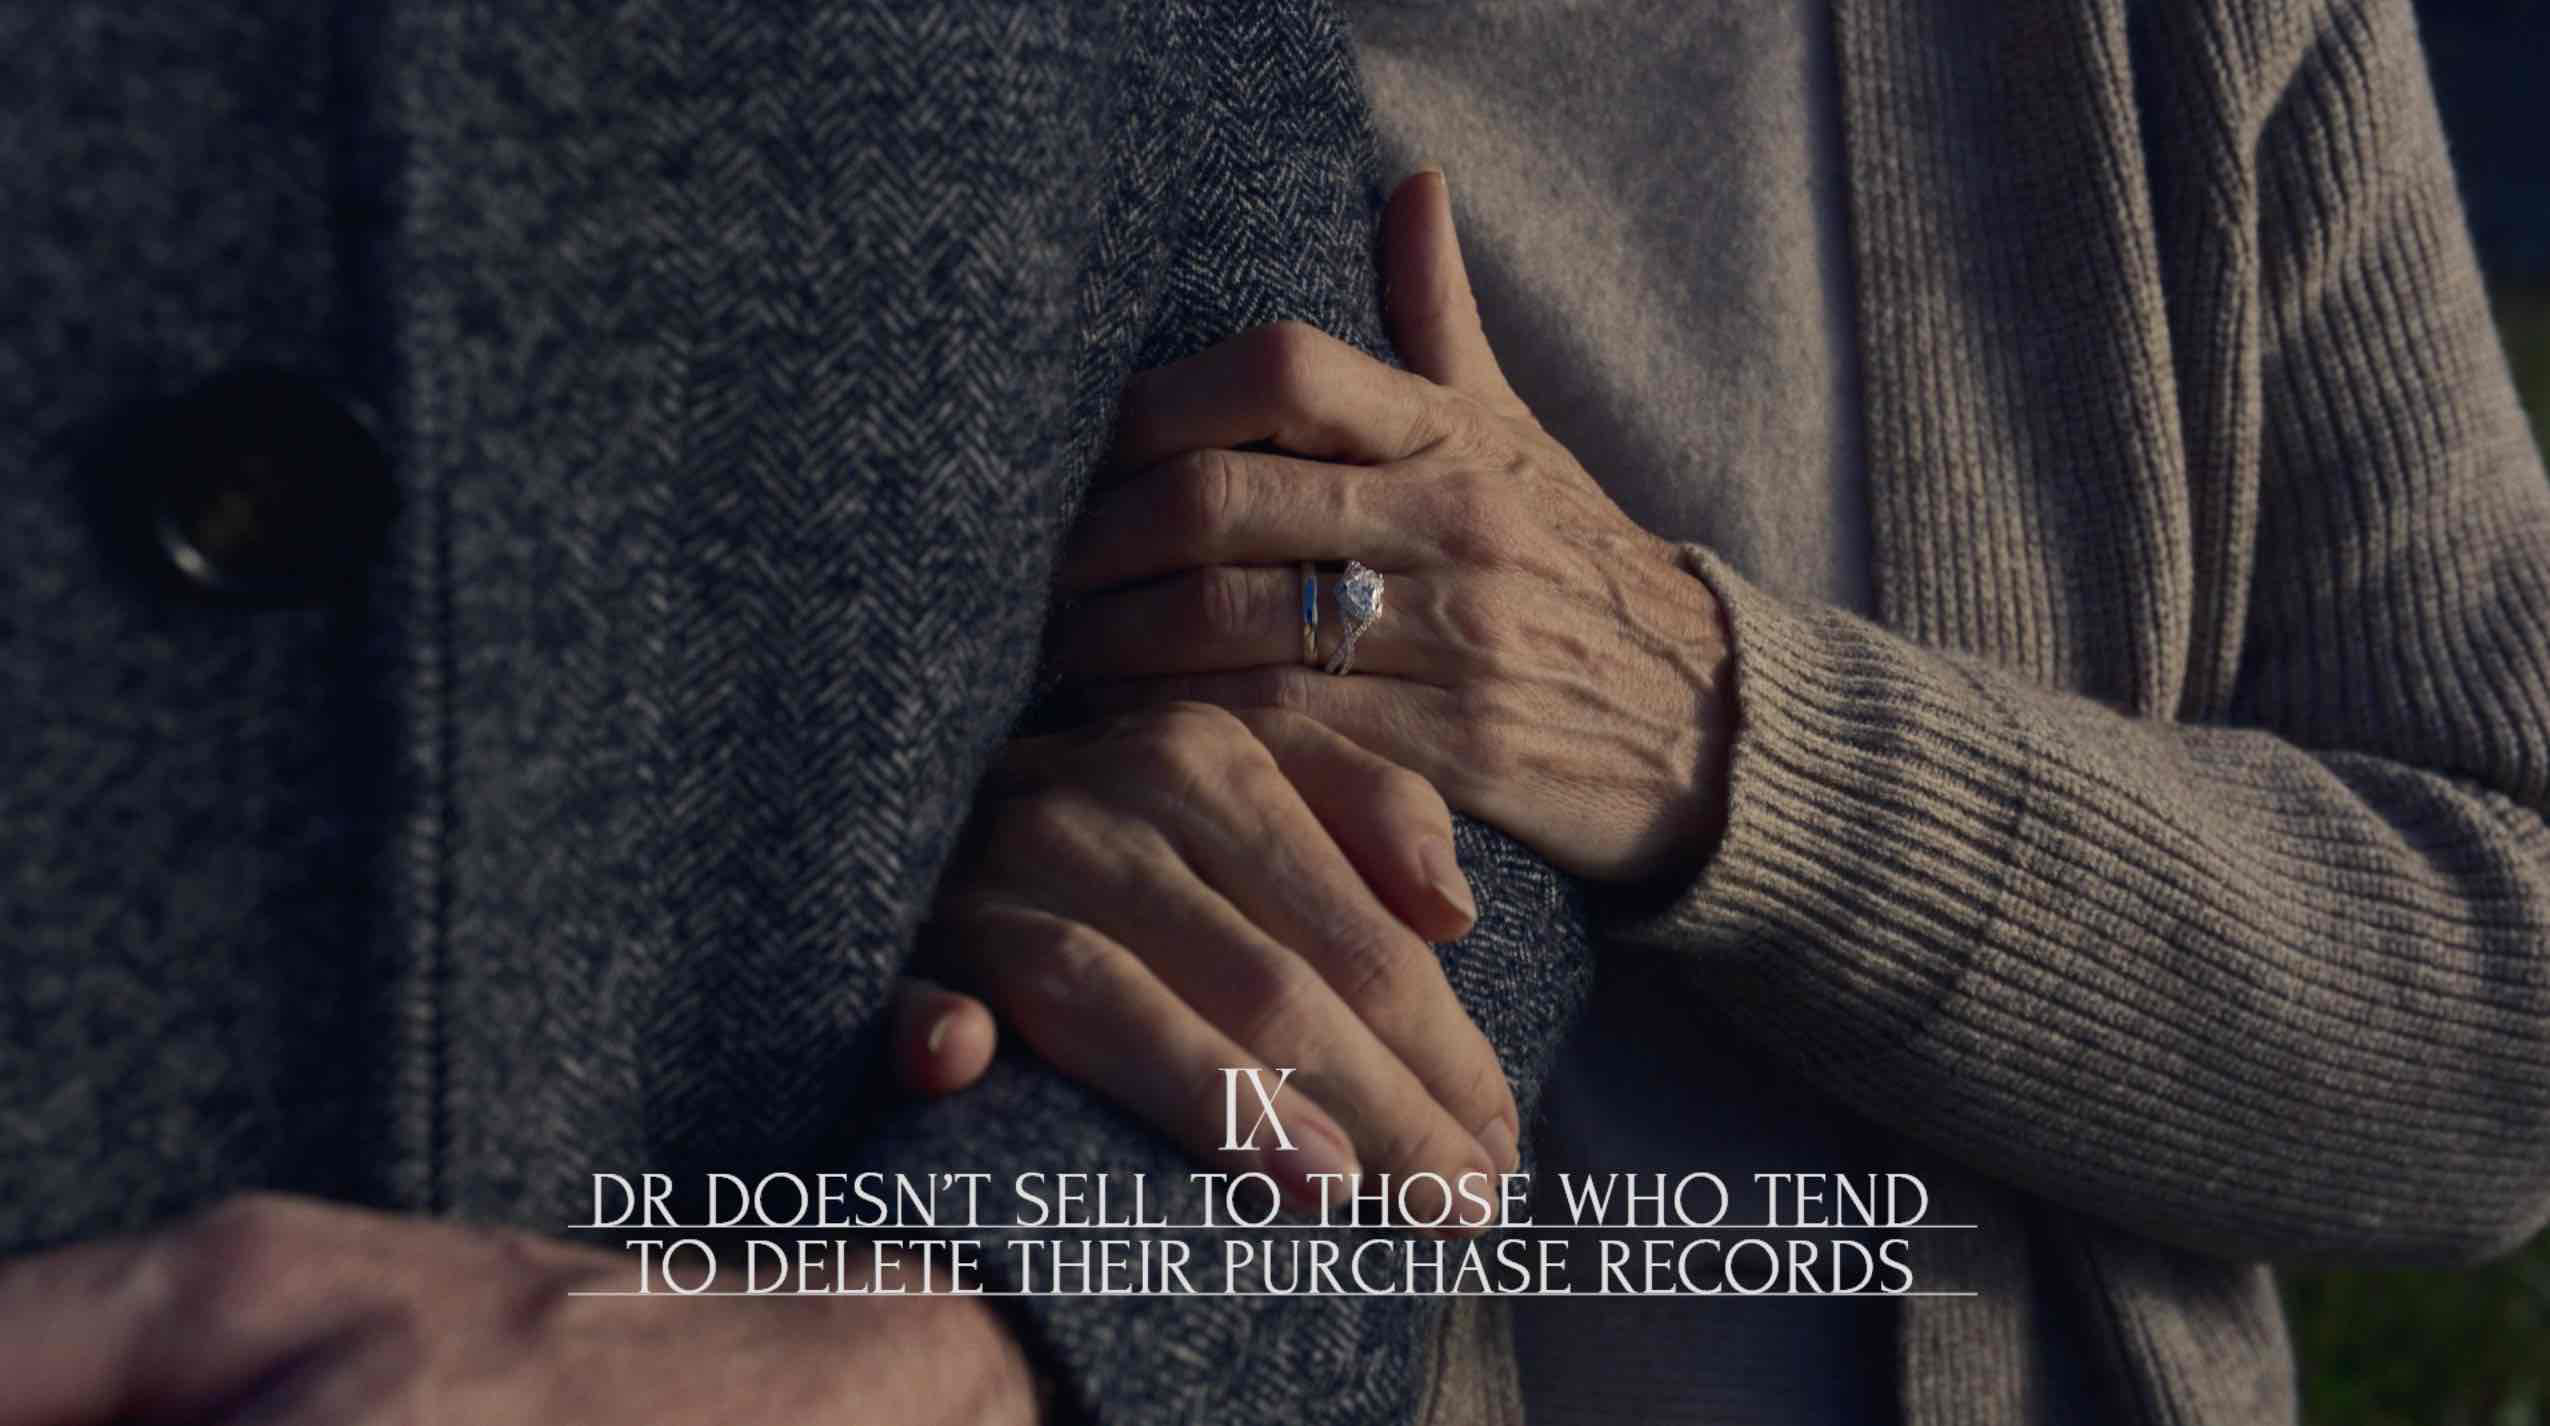 dr doesn't sell to those who tend to delete their purchase recoed